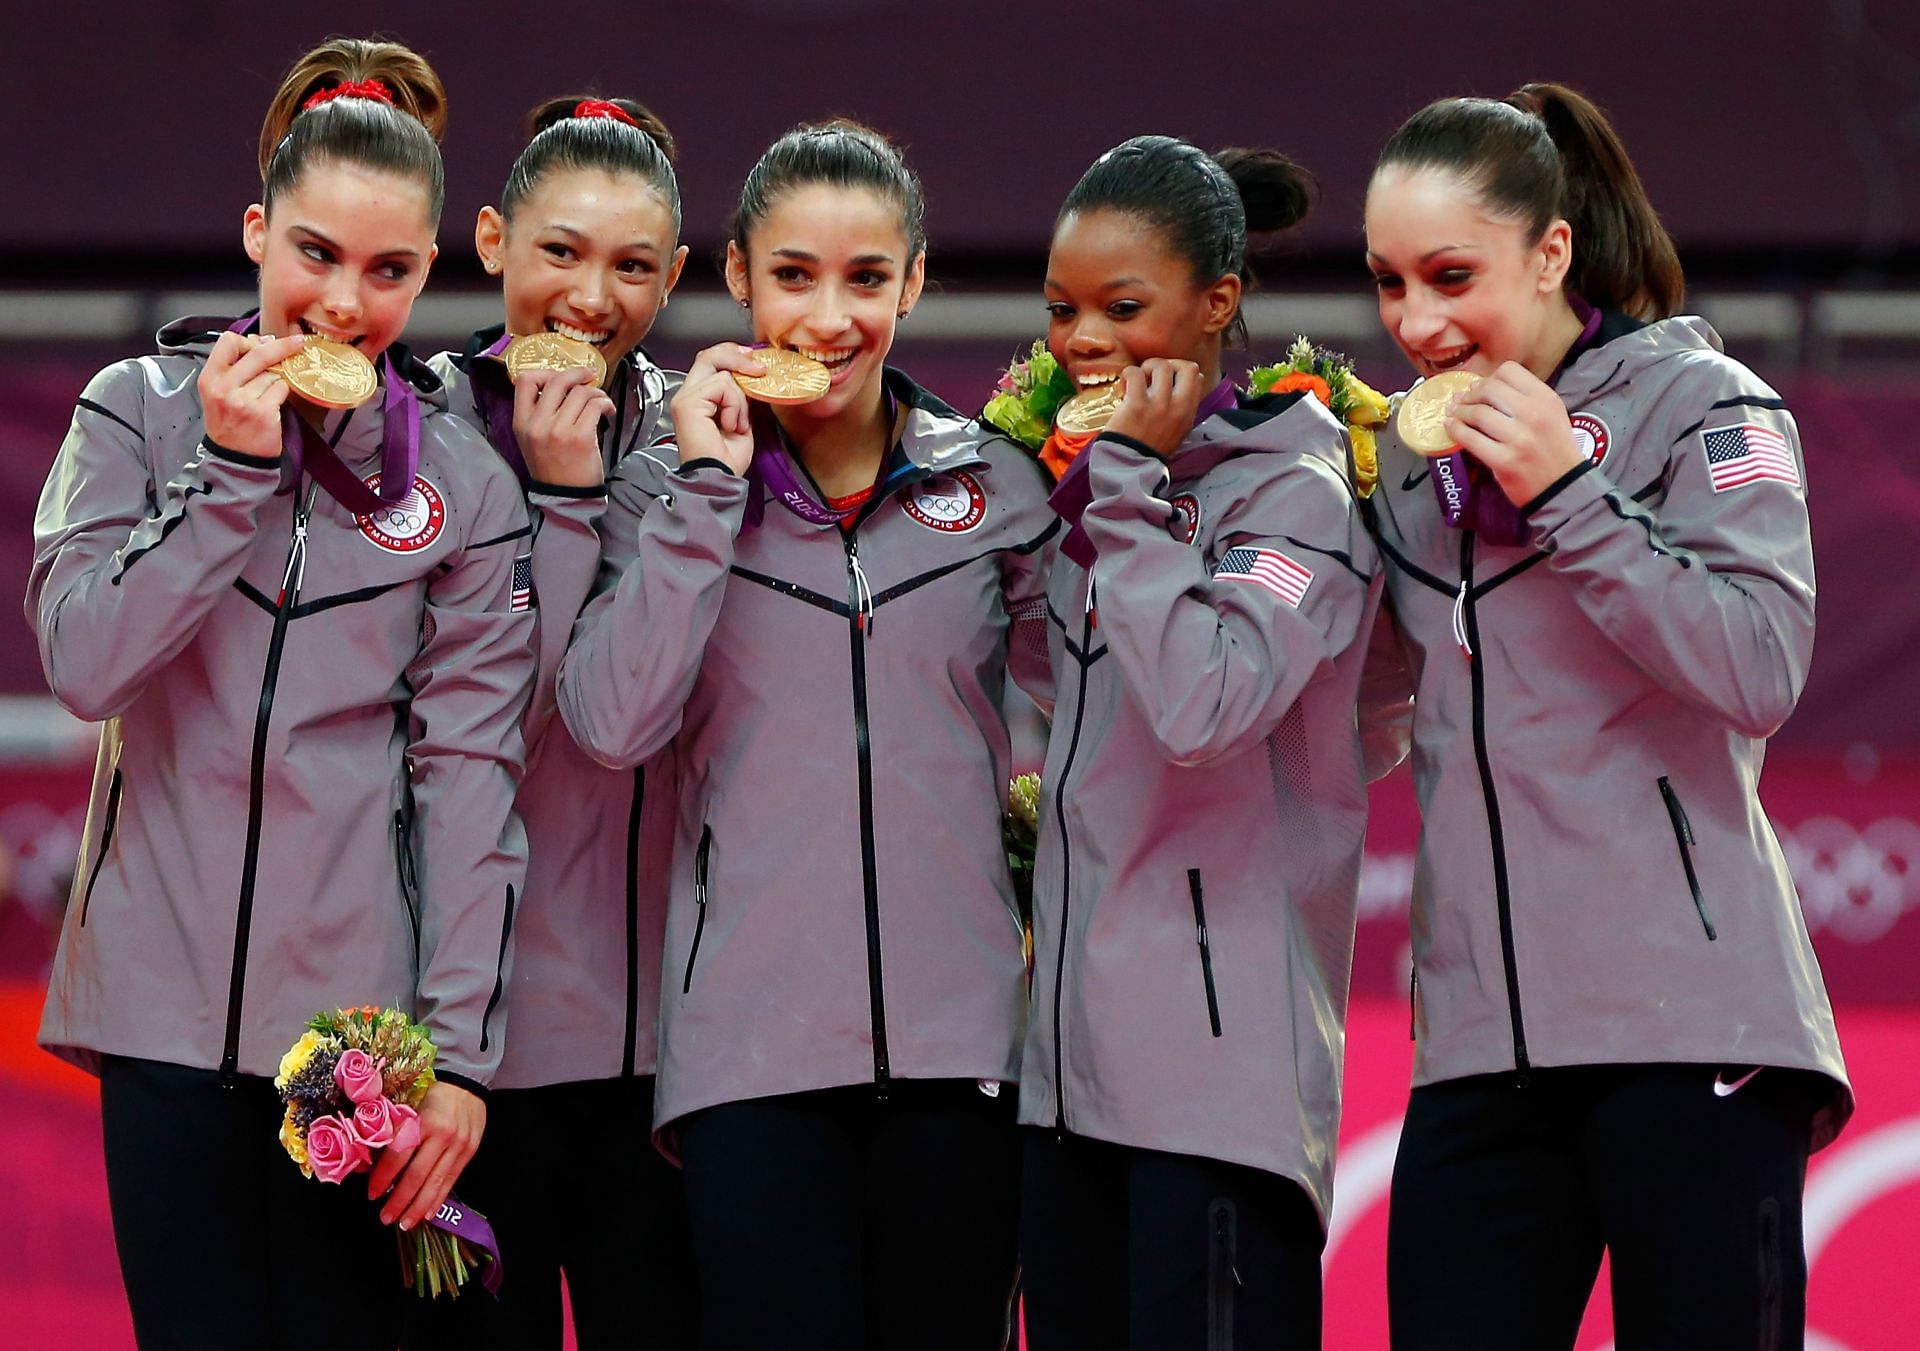 The &#039;Fierce Five&#039; team (Image courtesy: Getty)